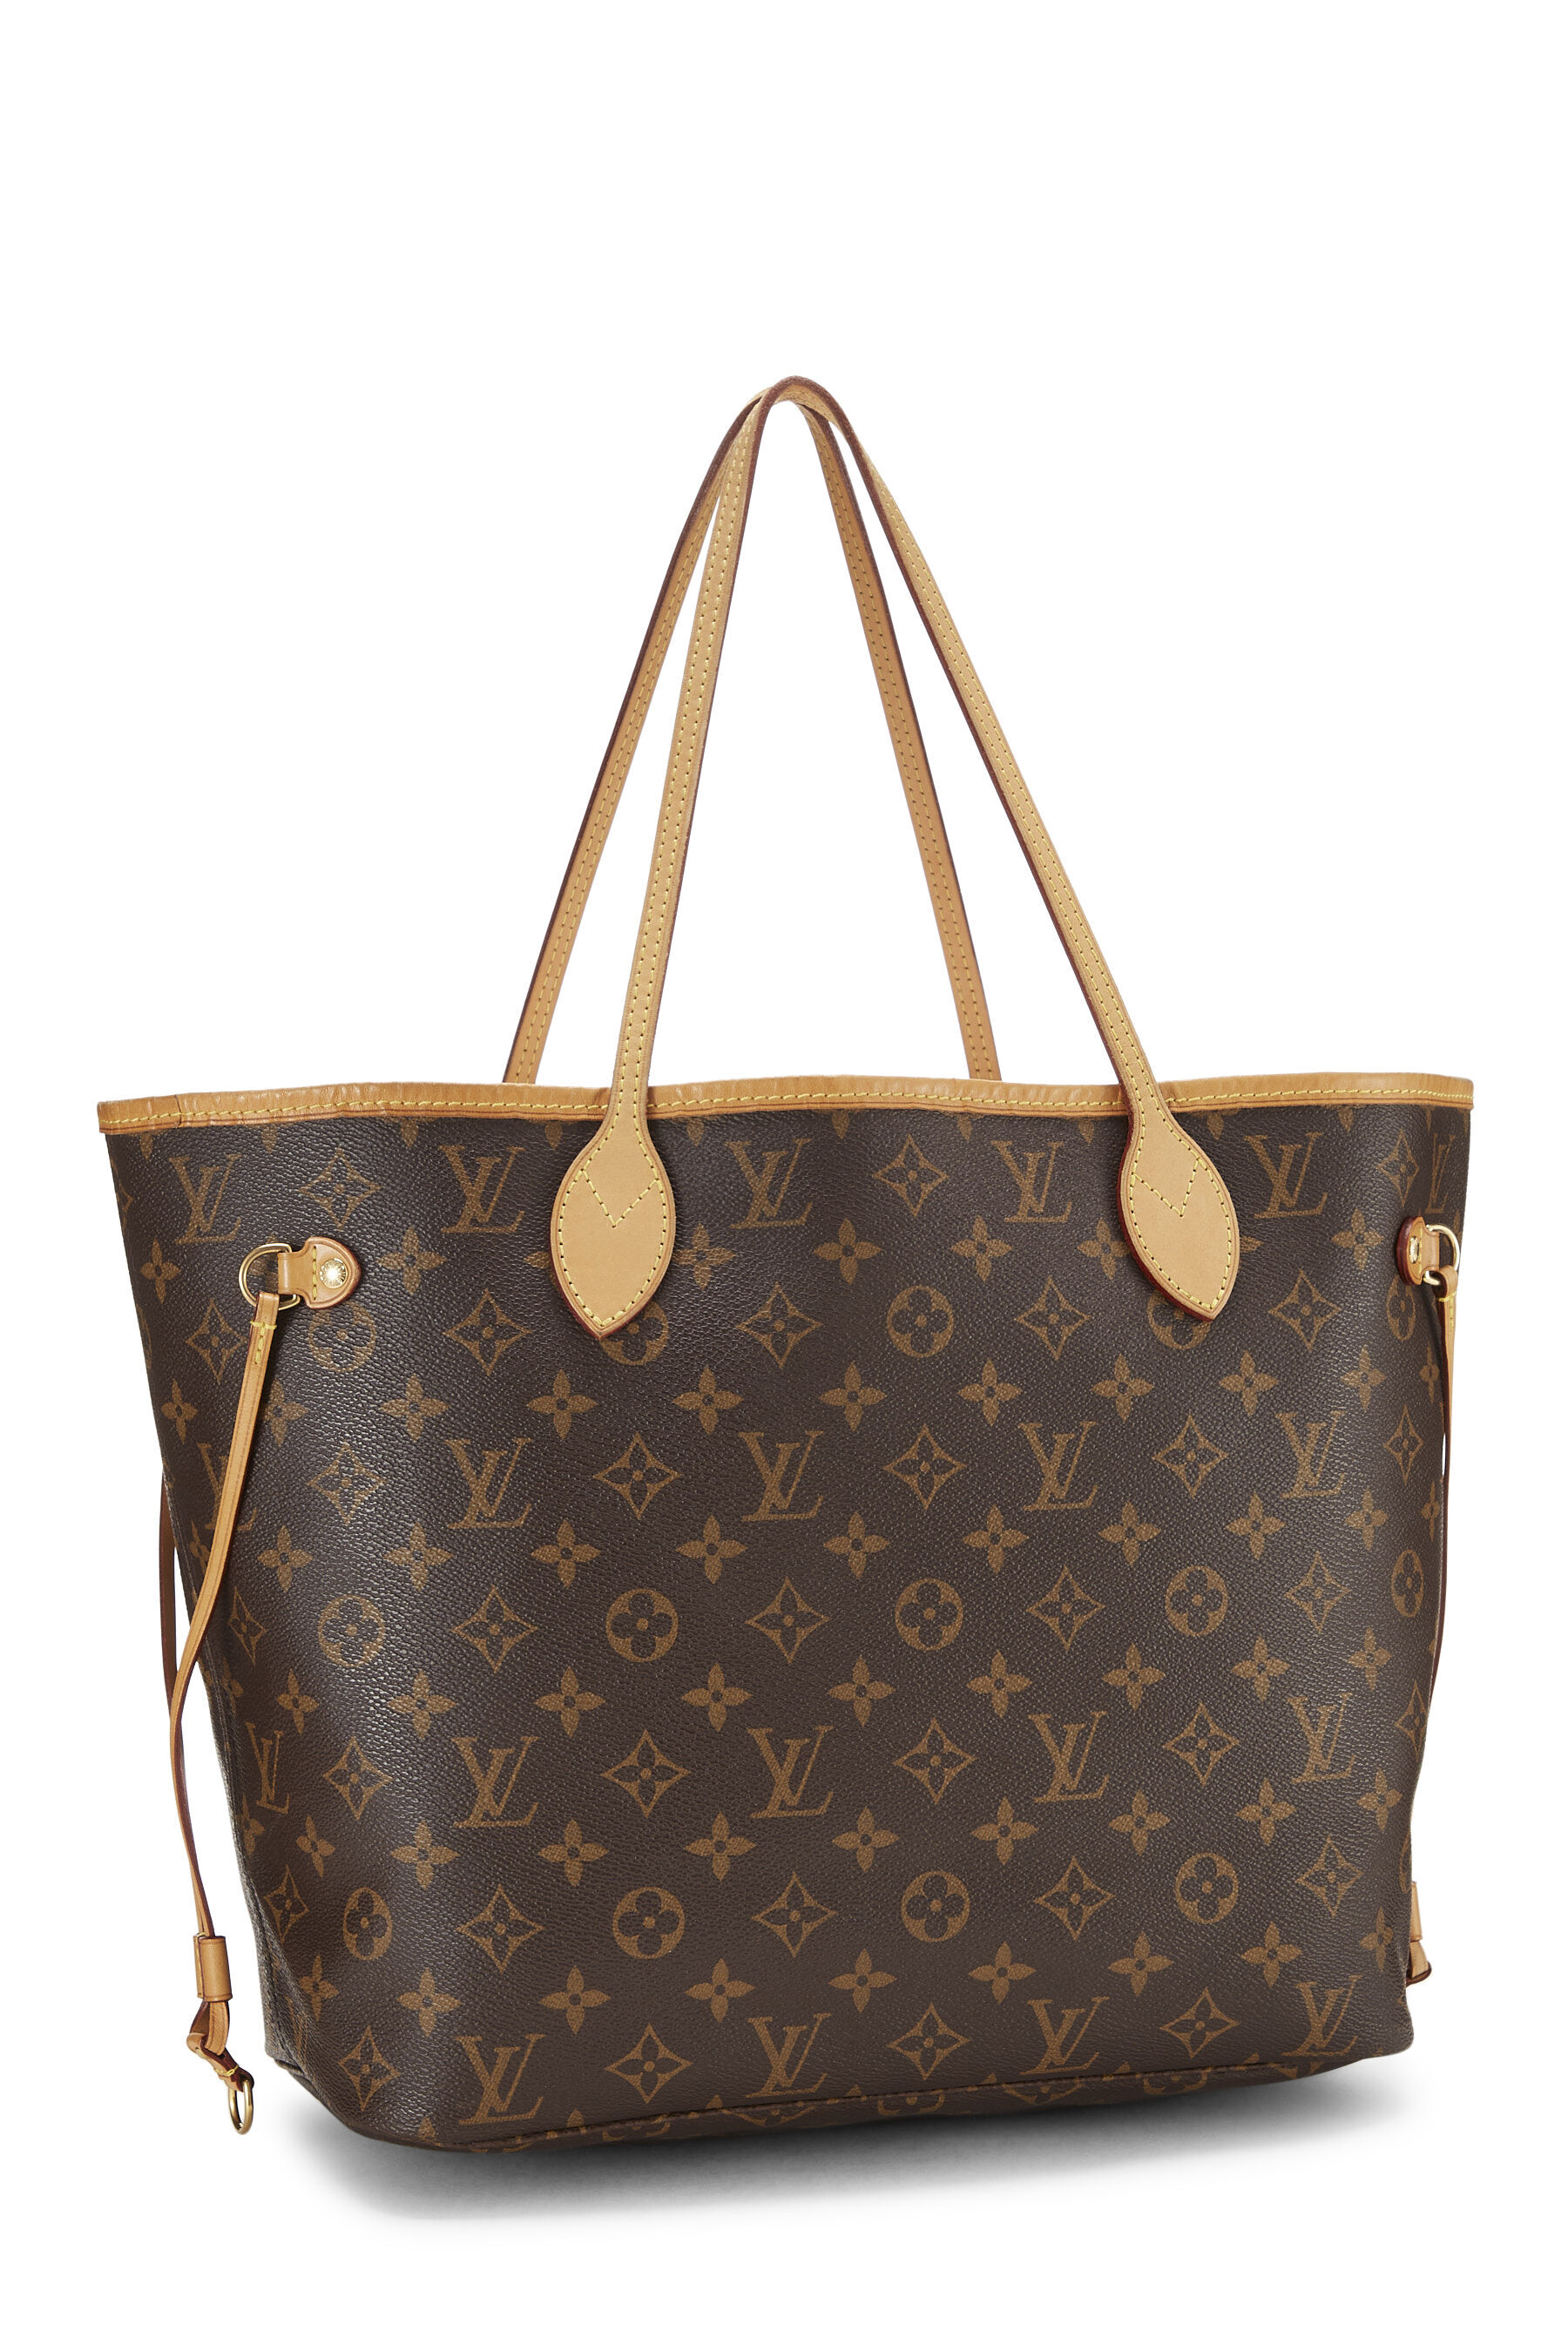 PreOwned Louis Vuitton  Louis Vuitton Second Hand  CODOGIRL